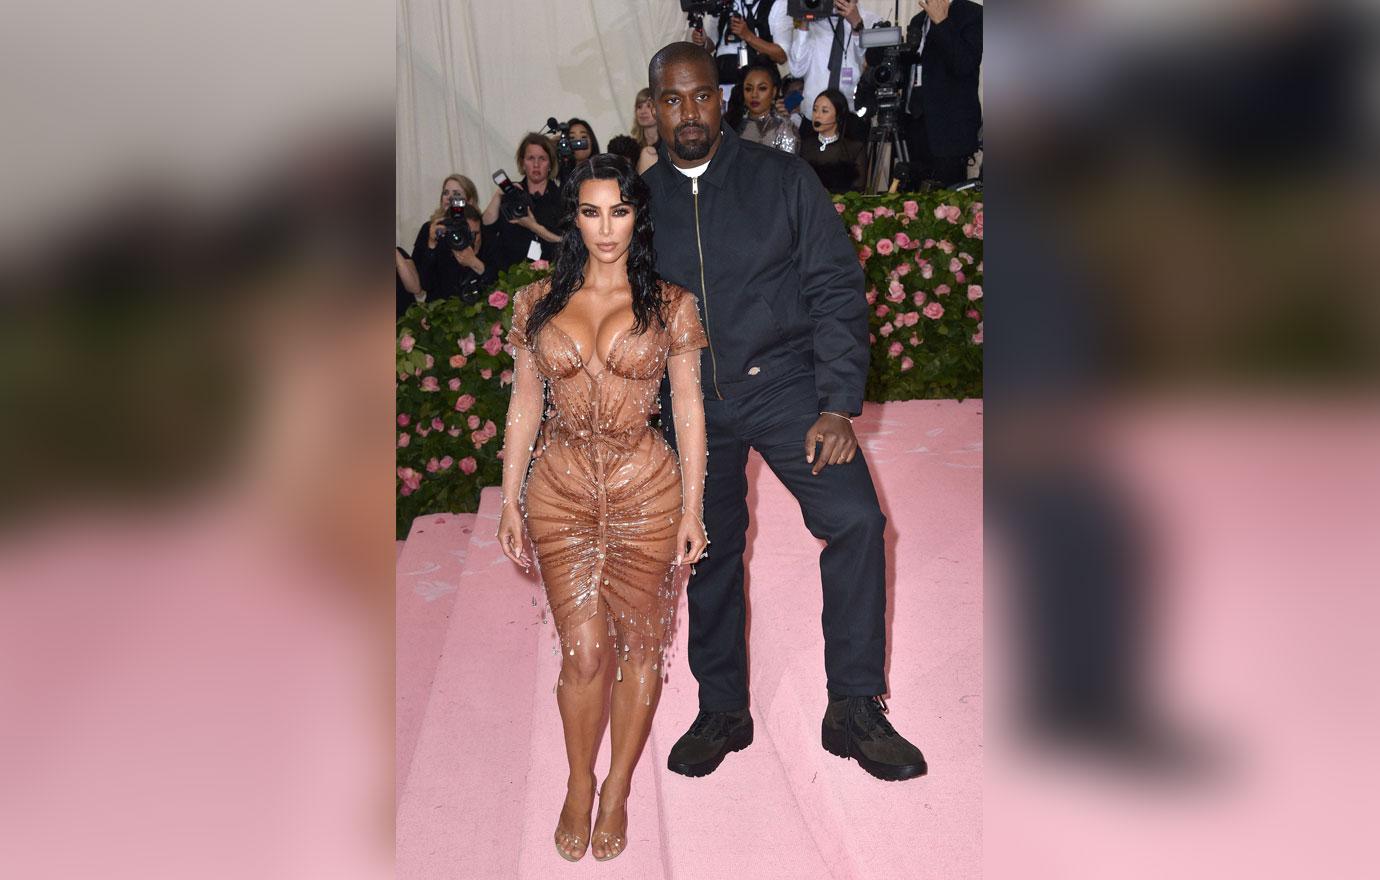 Kim Kardashian Will 'Never' Say It's 'Positive' to Show Cellulite